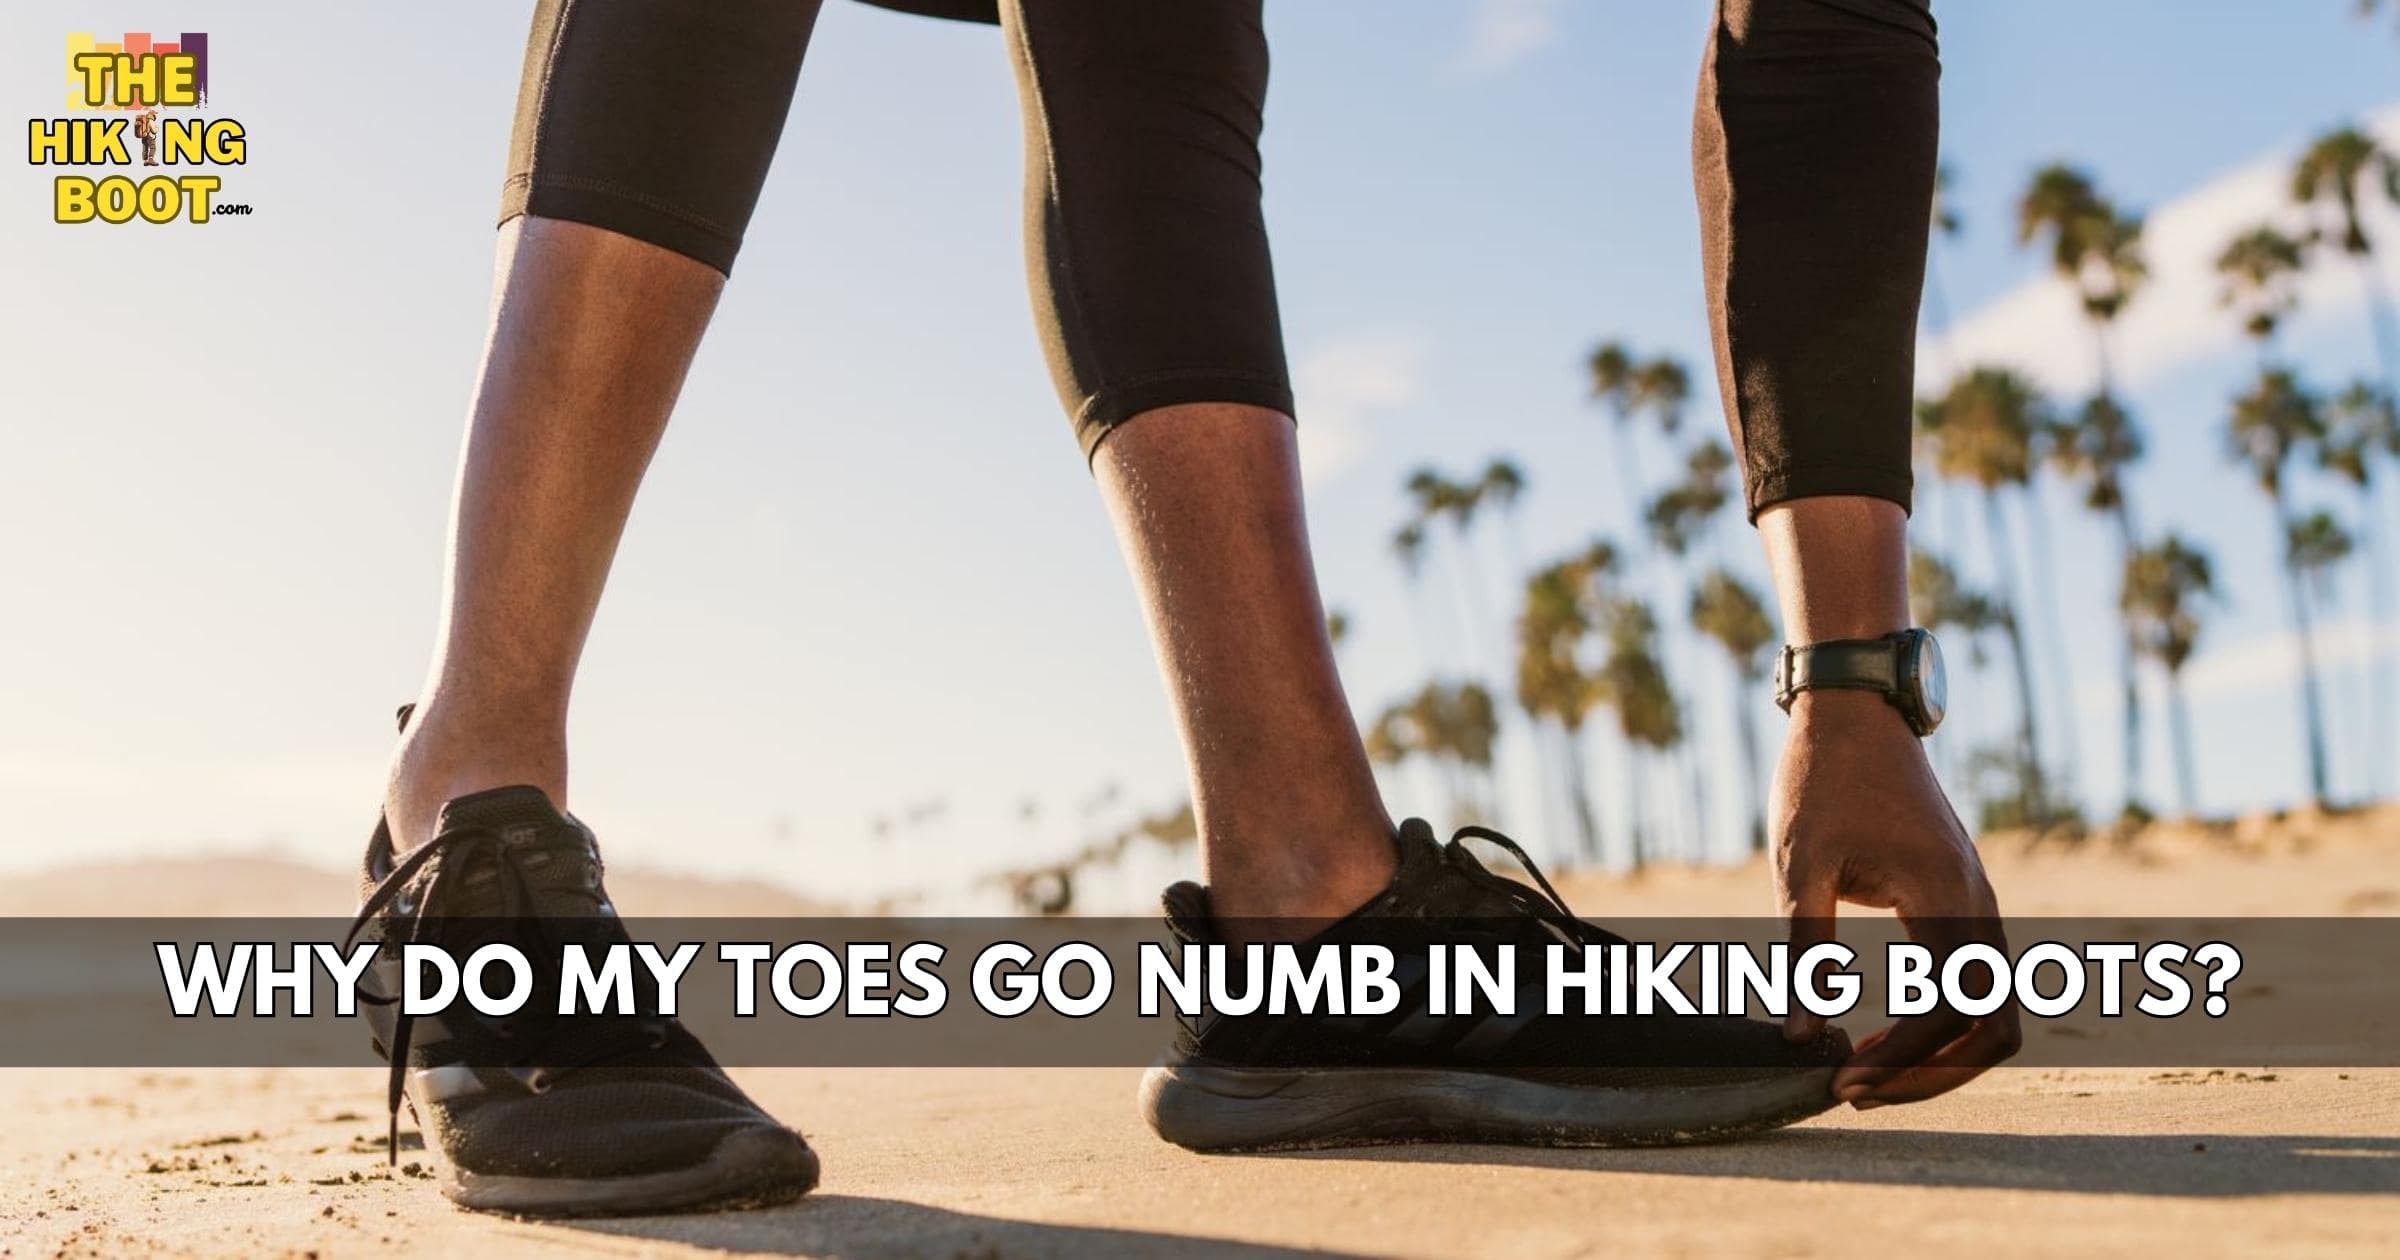 Why Do My Toes Go Numb In Hiking Boots?